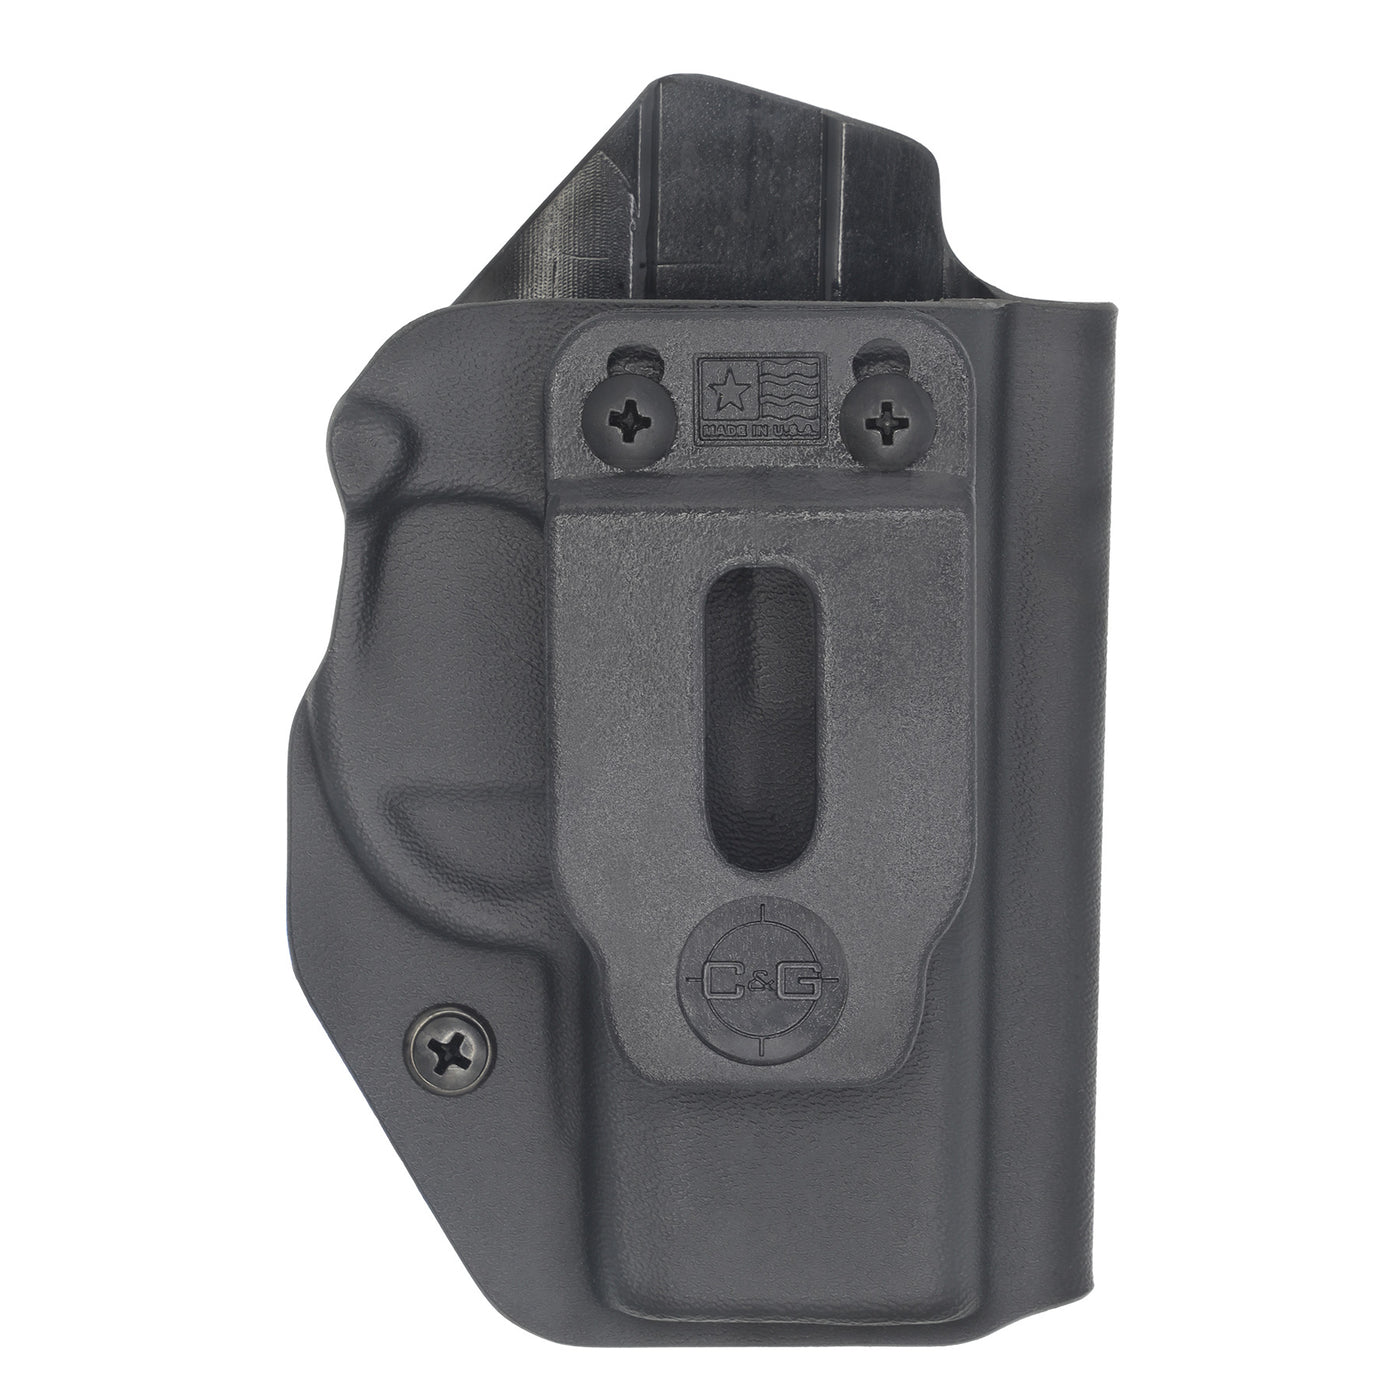 C&G Holsters quick ship Covert IWB kydex holster for Sig P290 in black without pistol